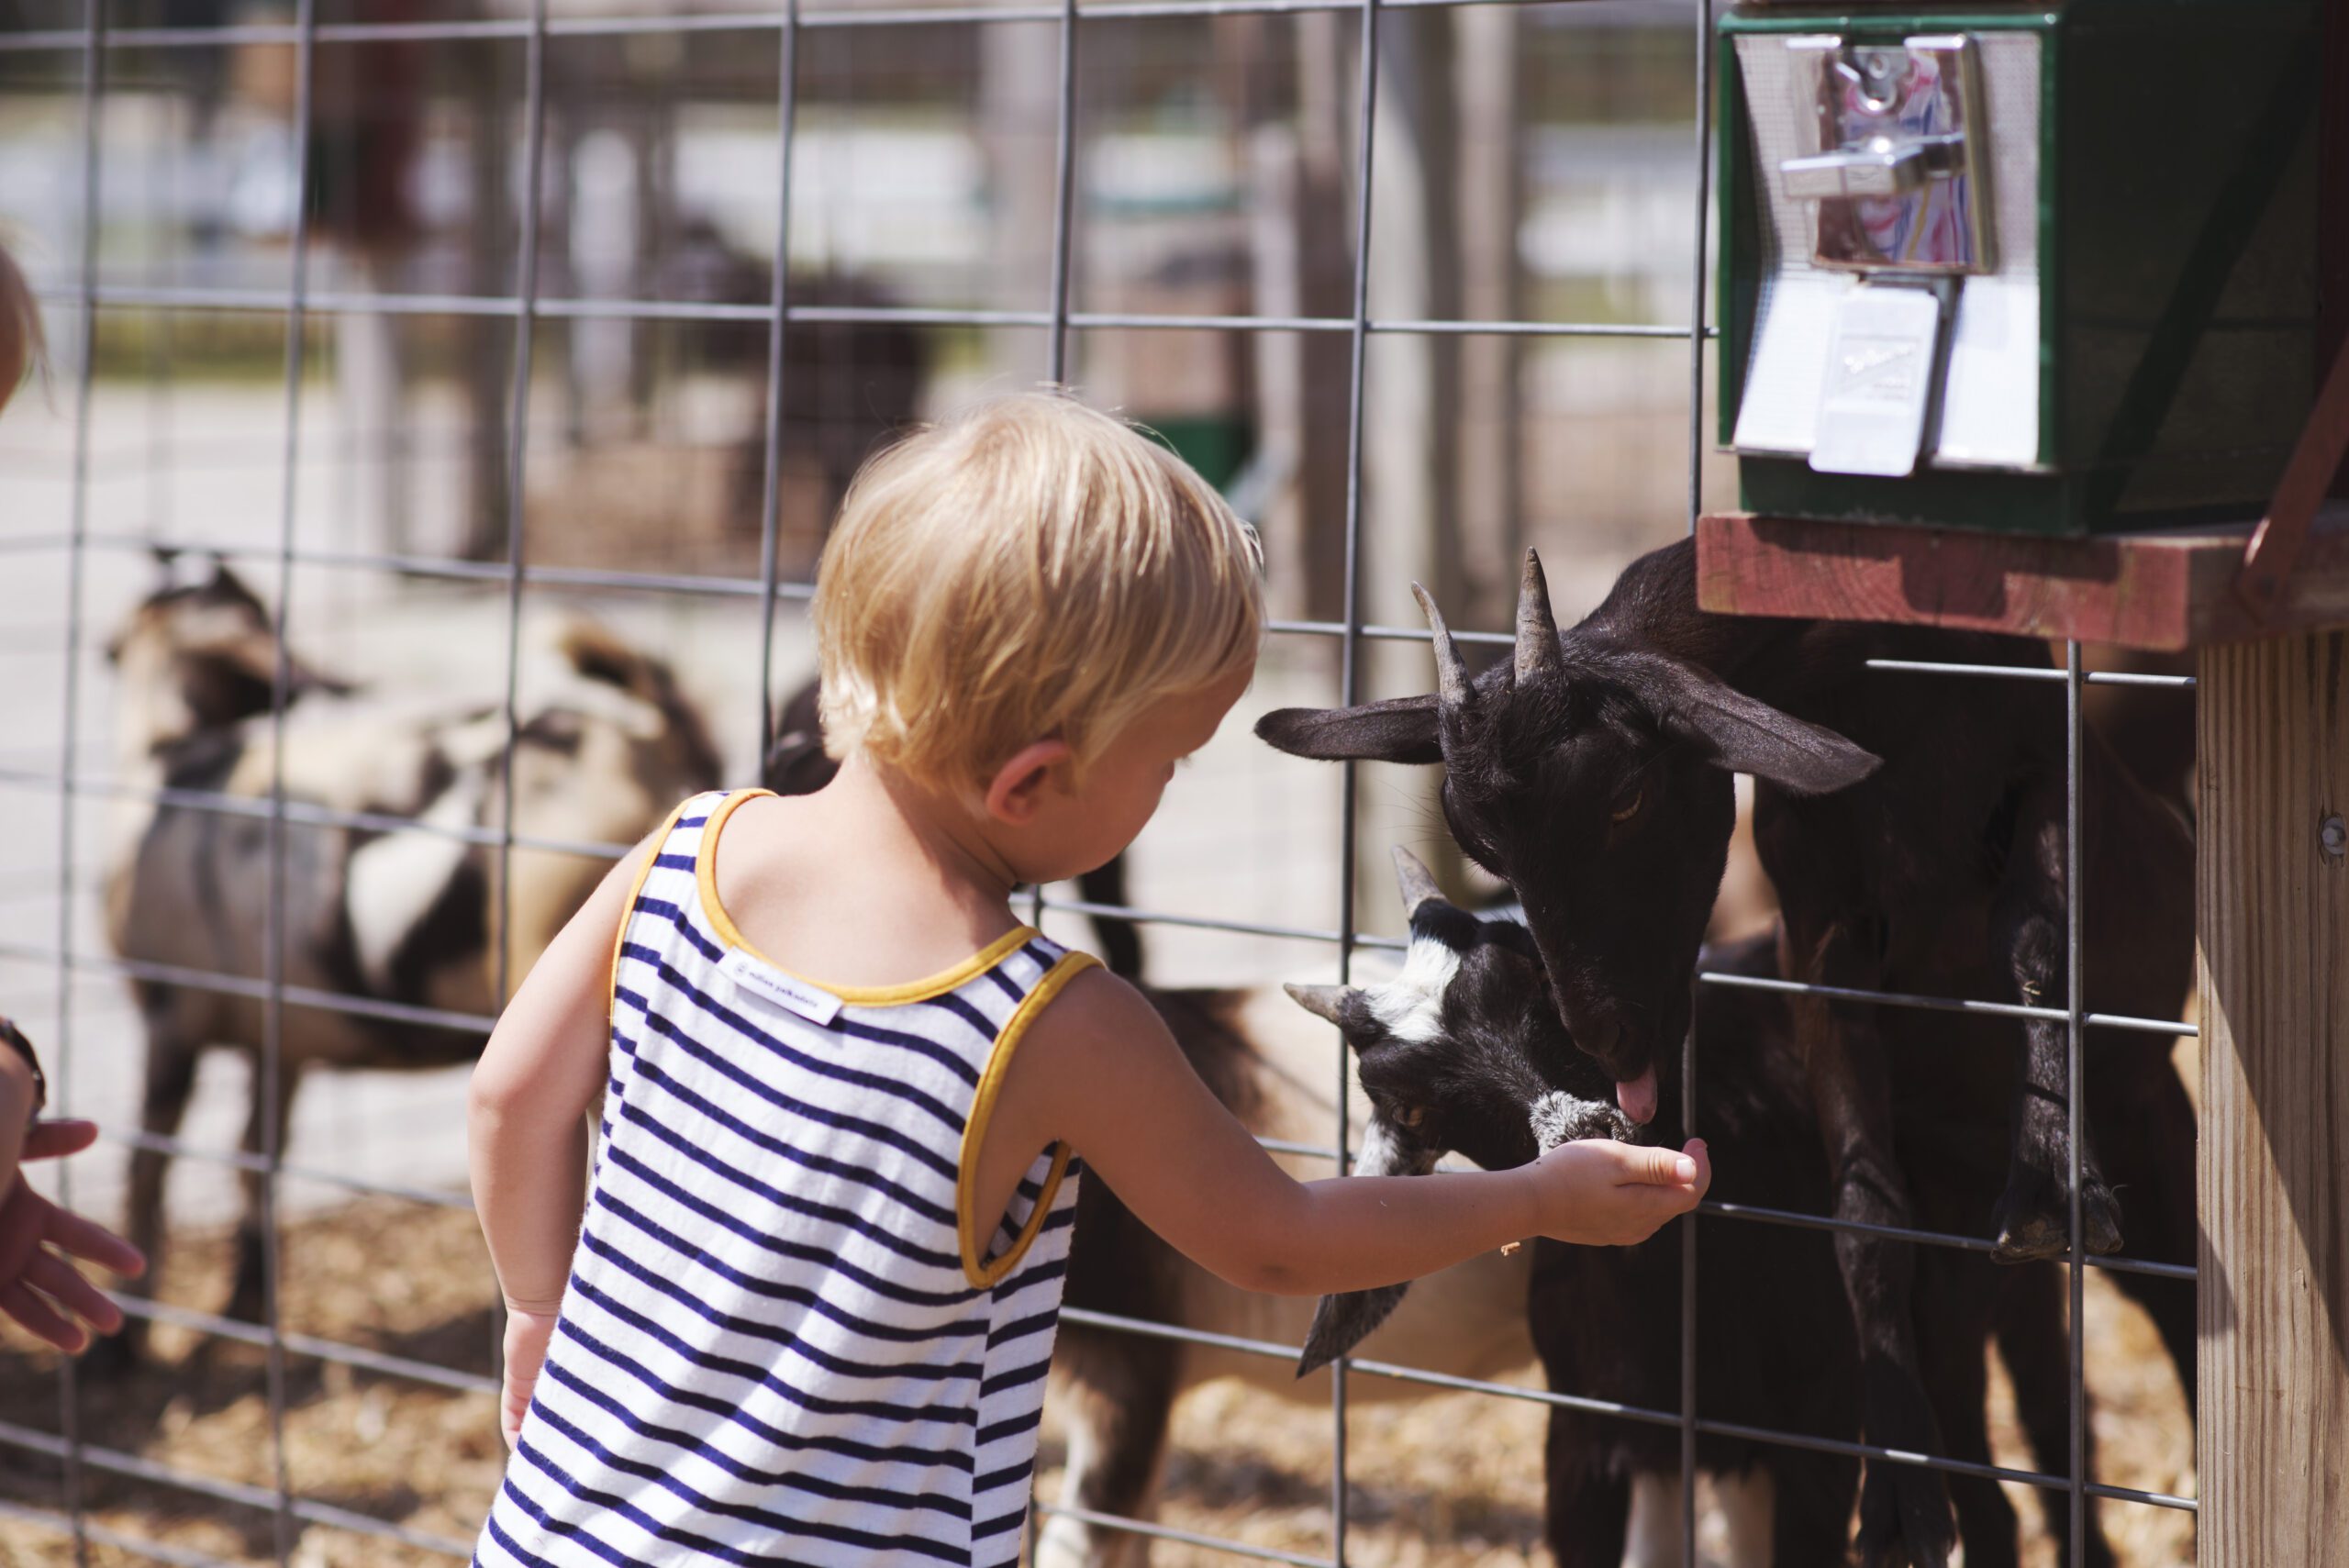 Small child in striped shirt feeds a cute goat.